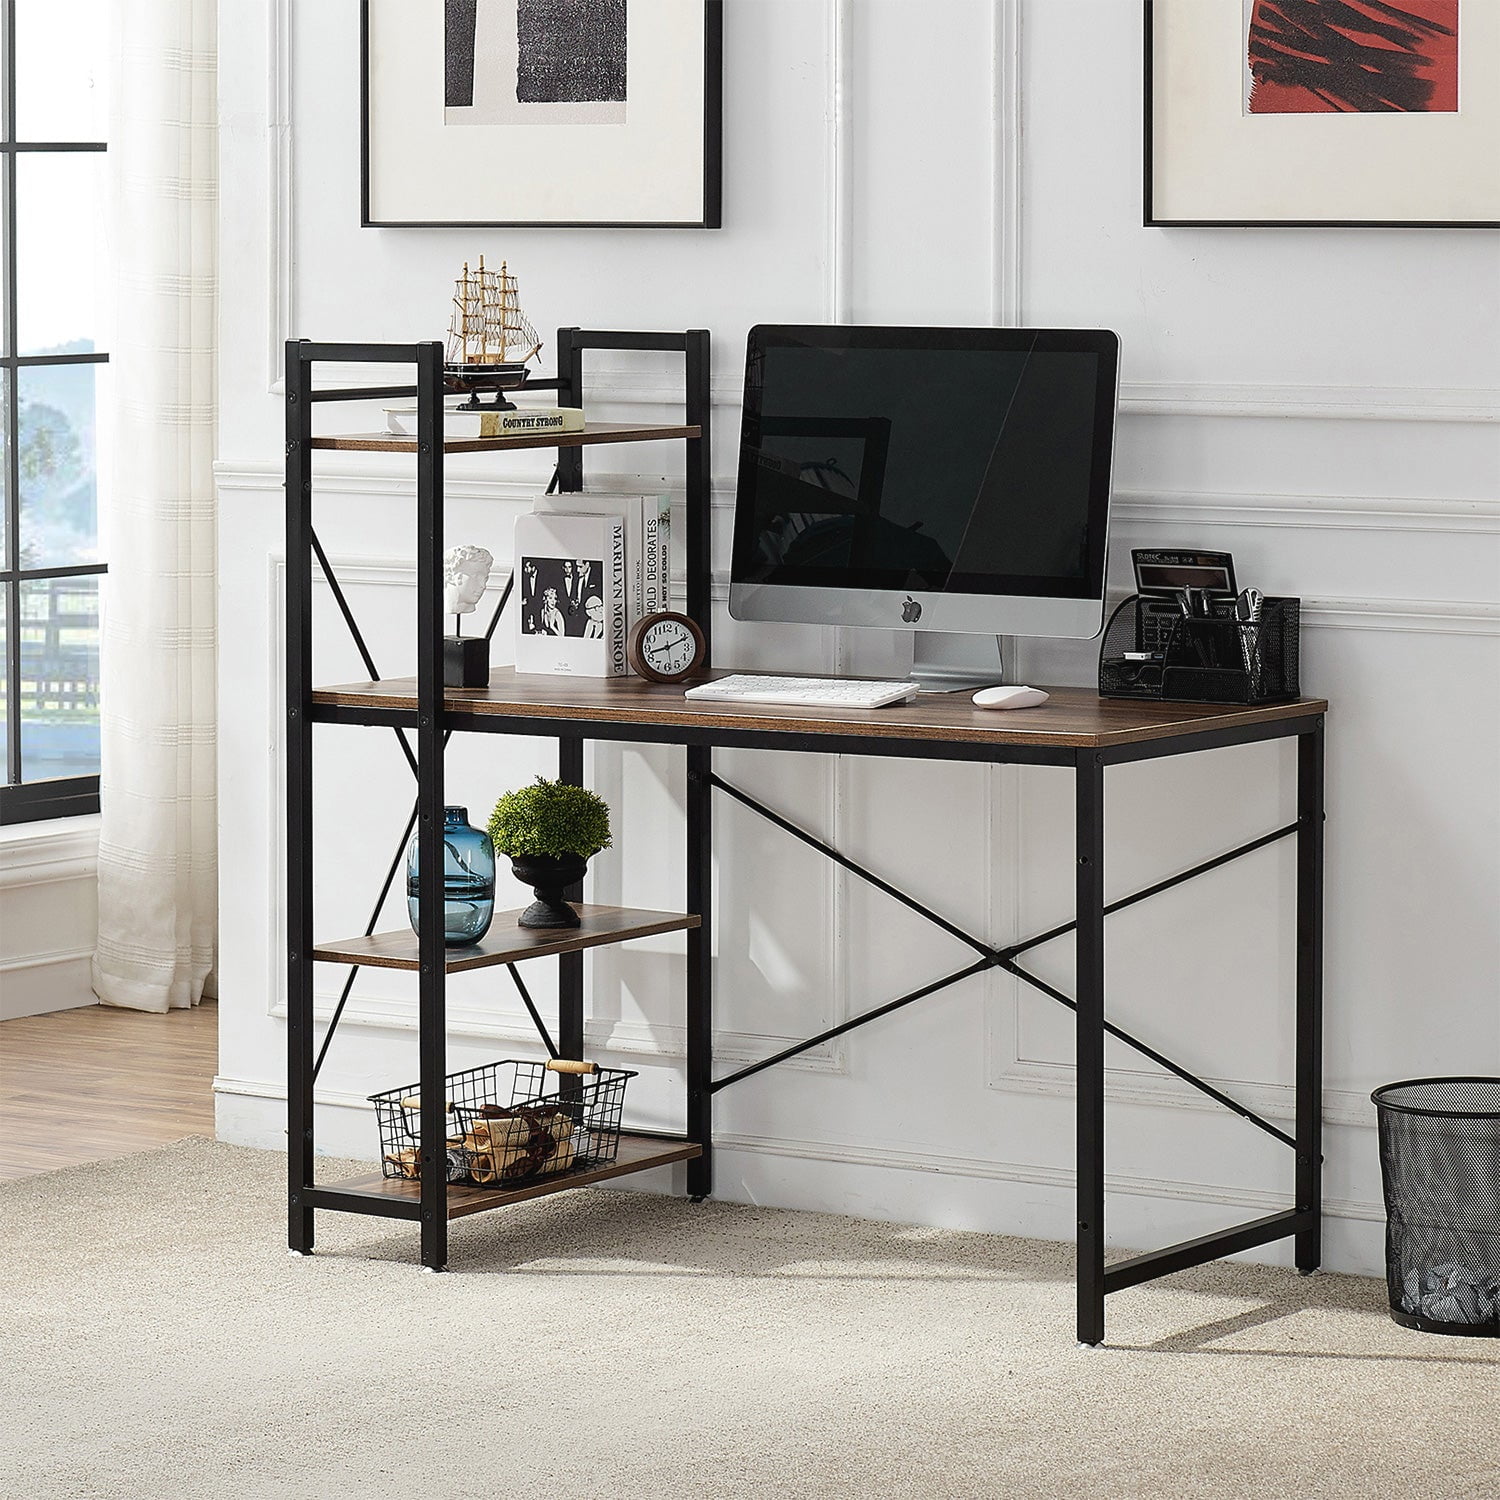 Home Office Laptop Desktop Table for Small Spaces Queiting Modern Home Office Computer PC Desk Writing Table Workstation Wood Bookshelf with Storage Shelf Keyboard Tray